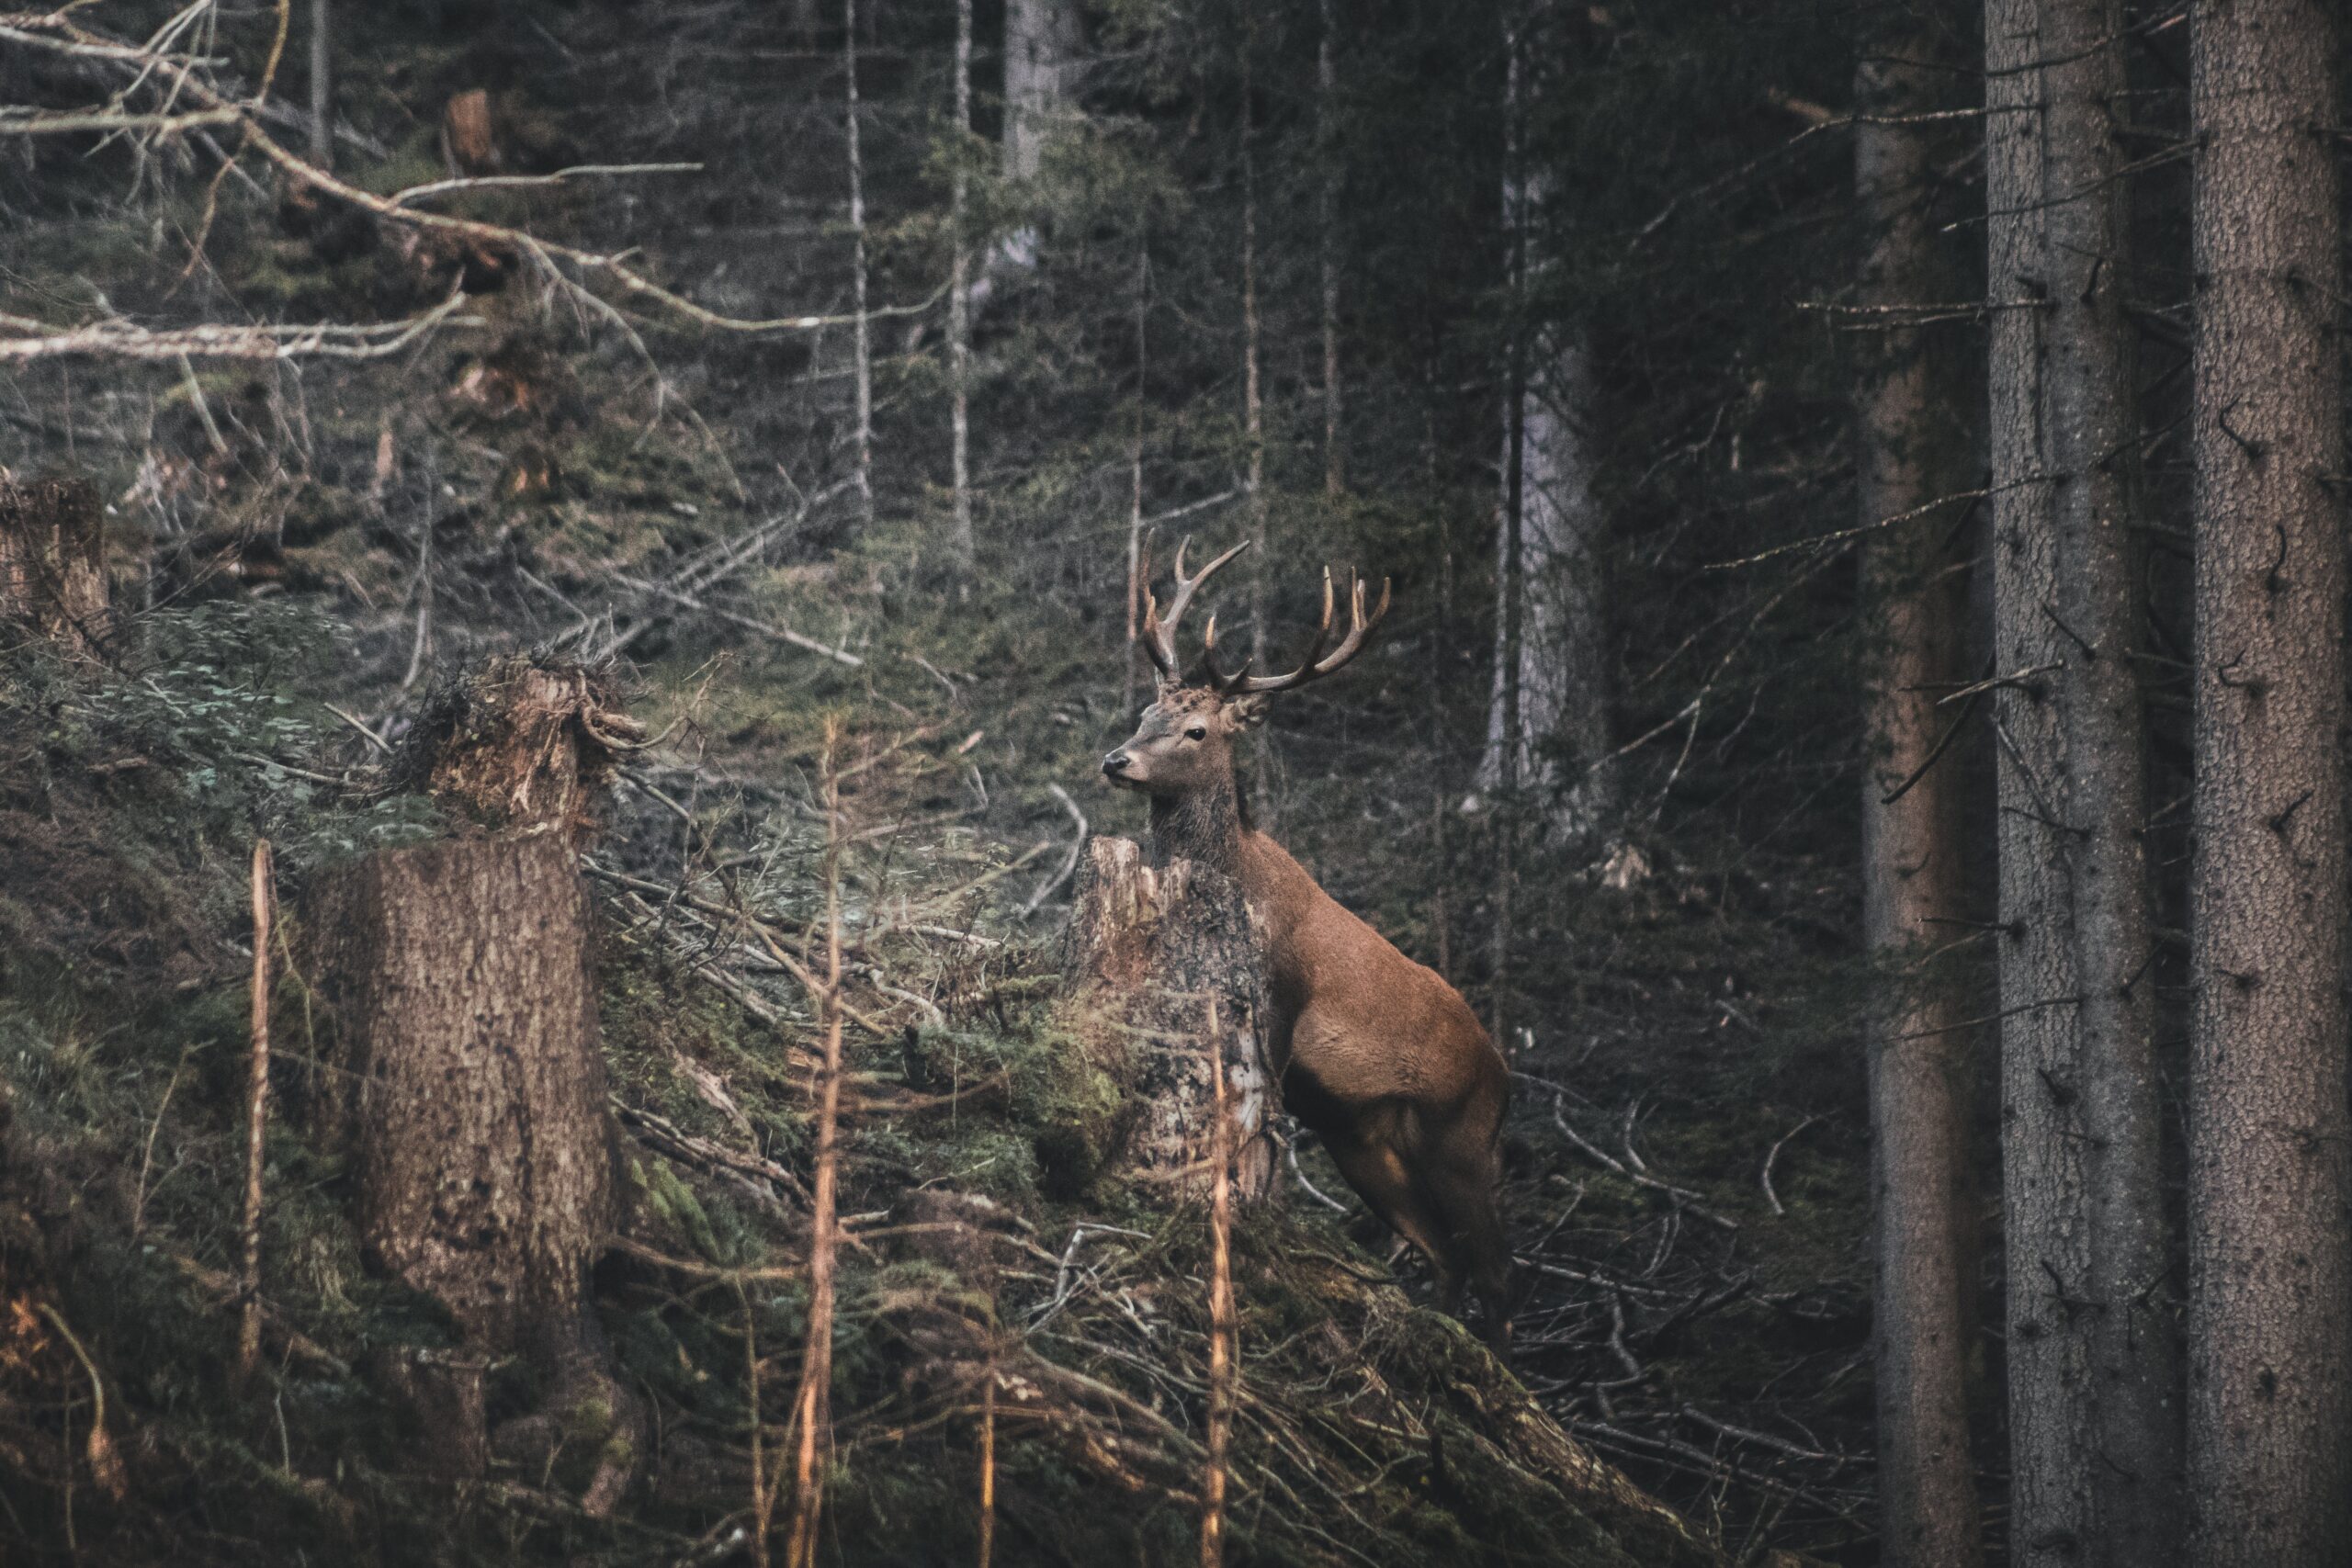 Large deer running through the forest.